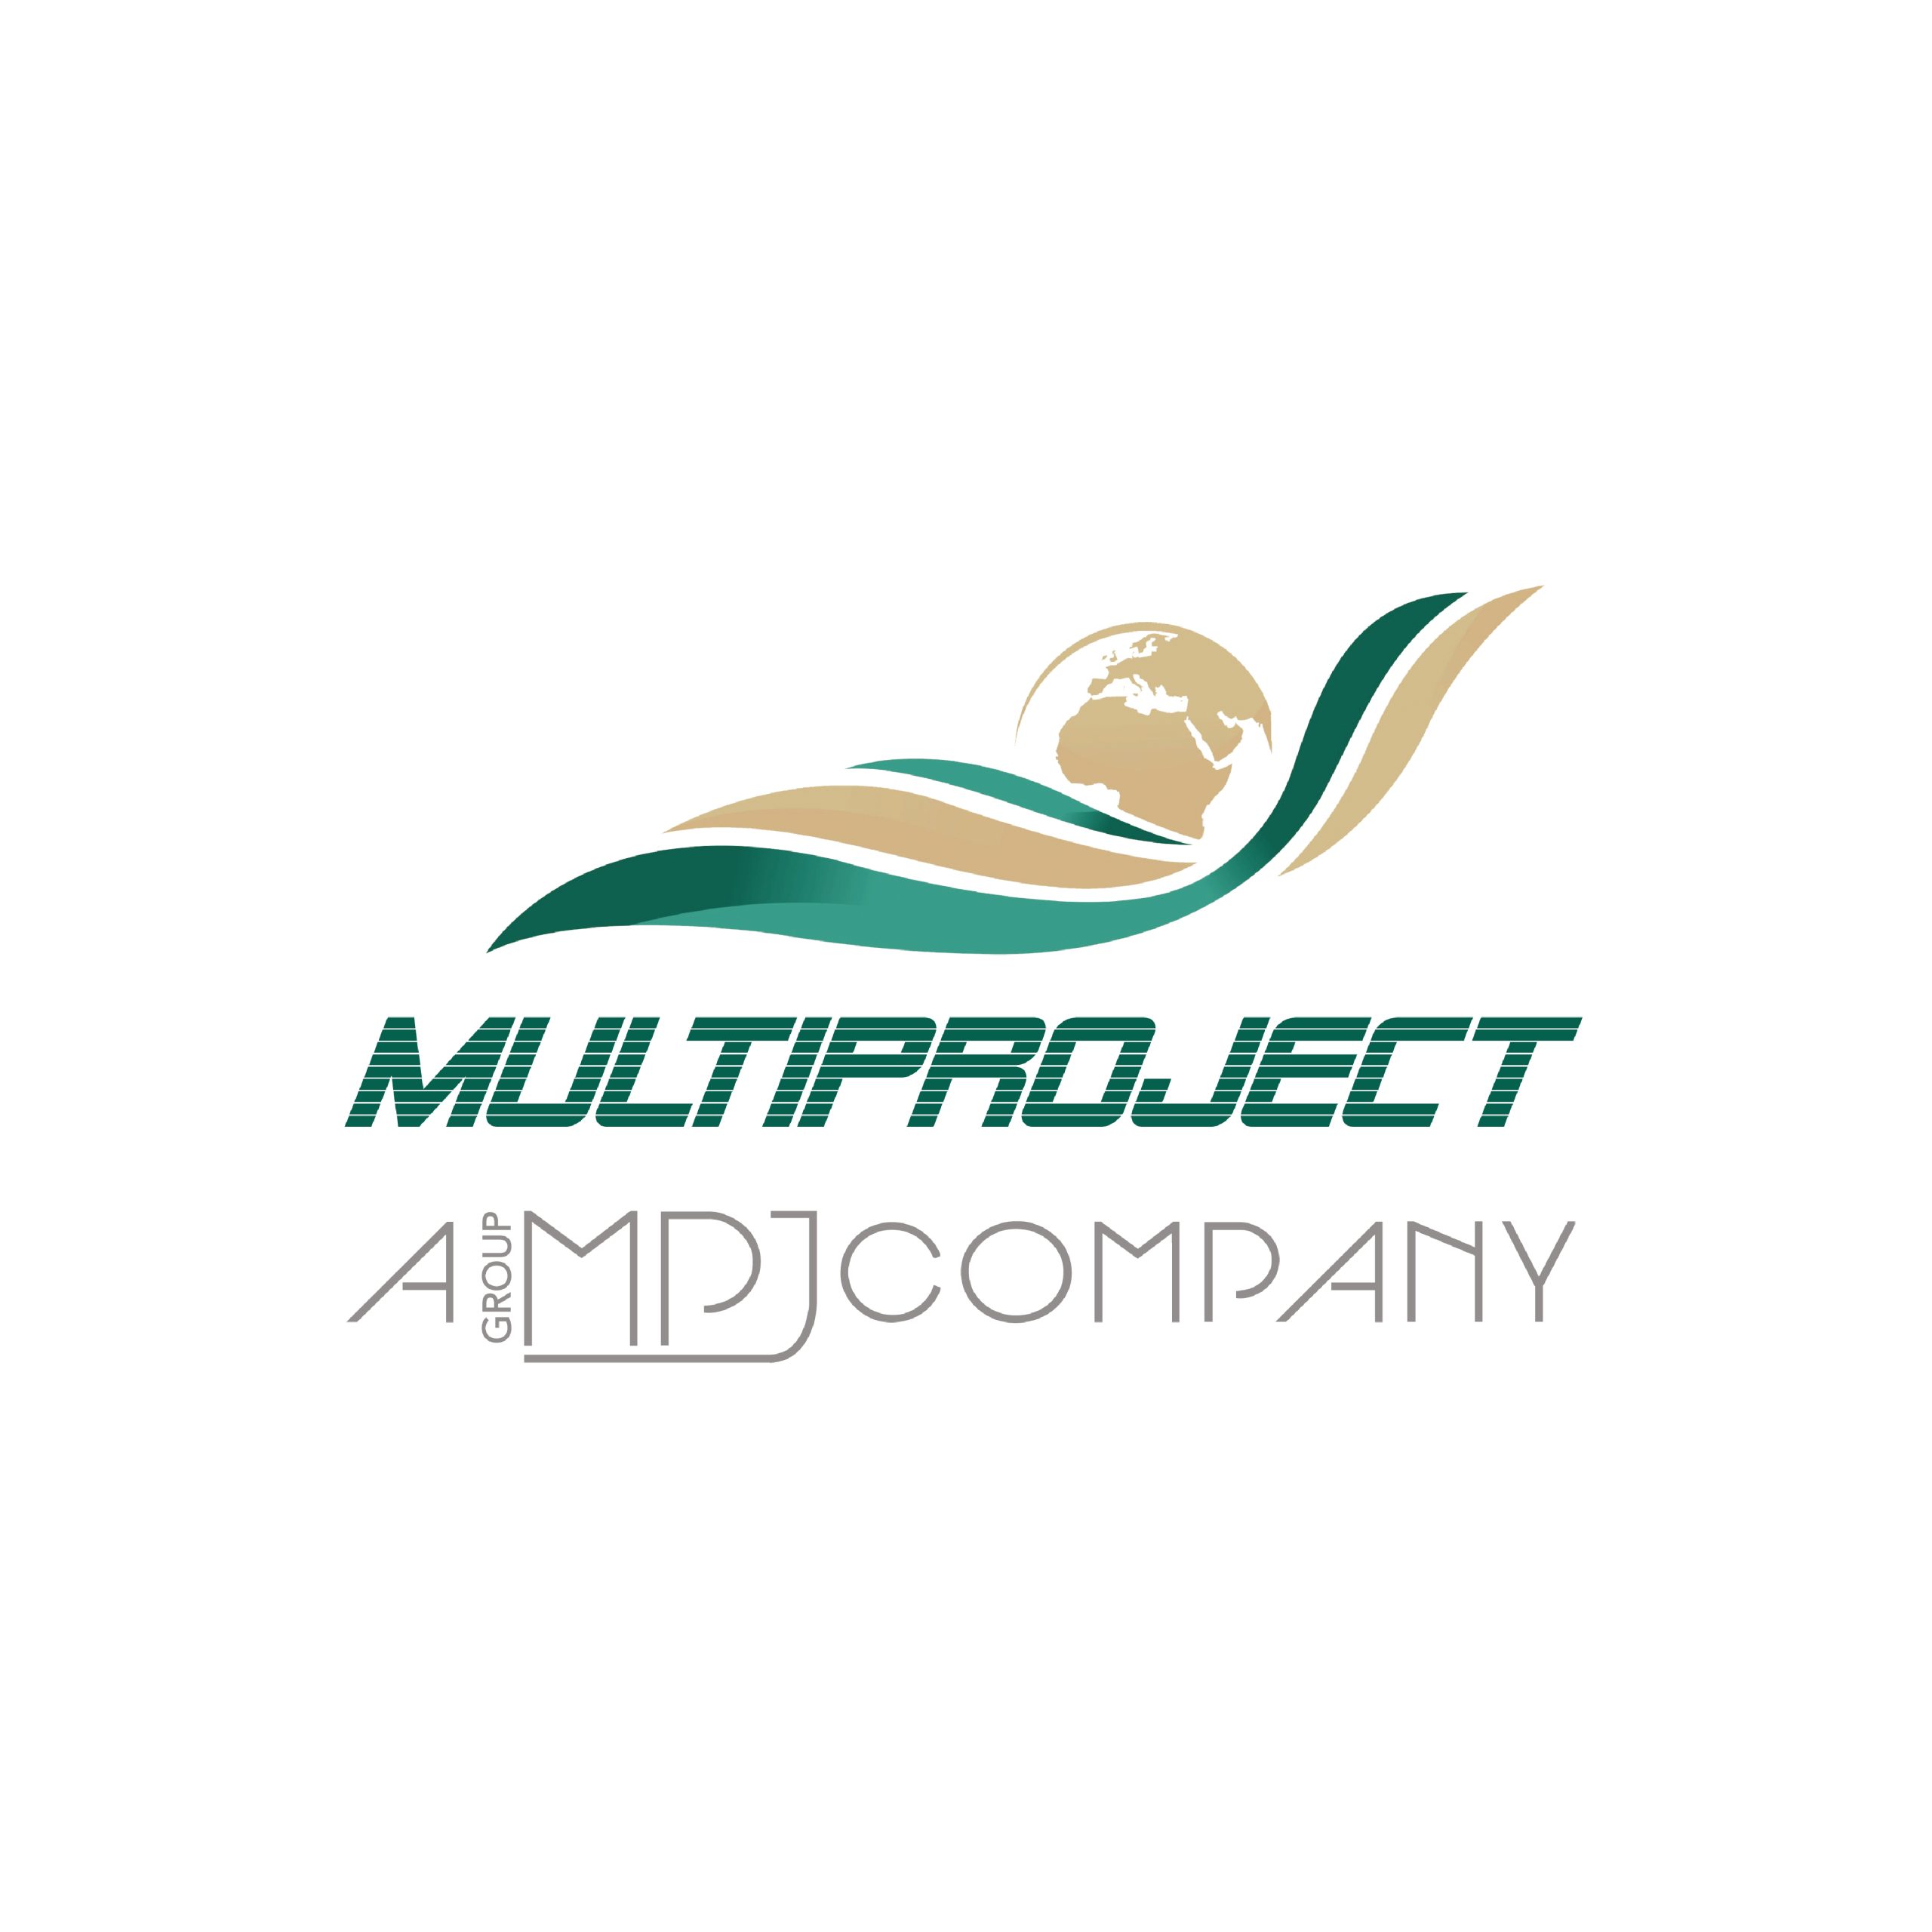 Multiproject - logo1000x1000